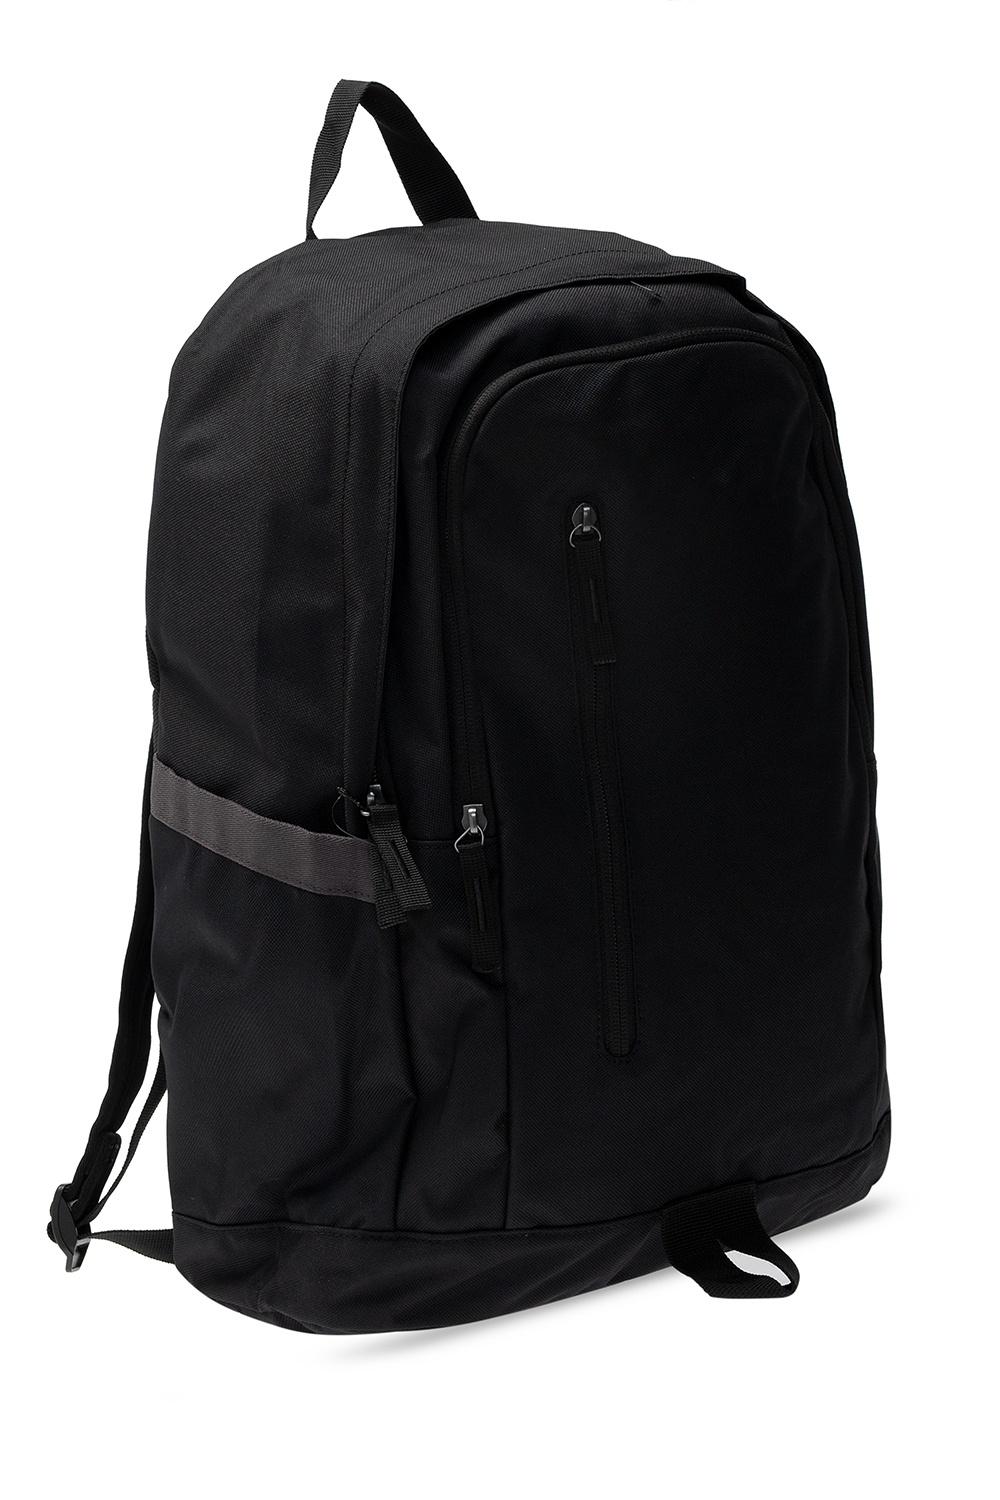 Nike Synthetic All Access Soleday Backpack in Black/White (Black) | Lyst